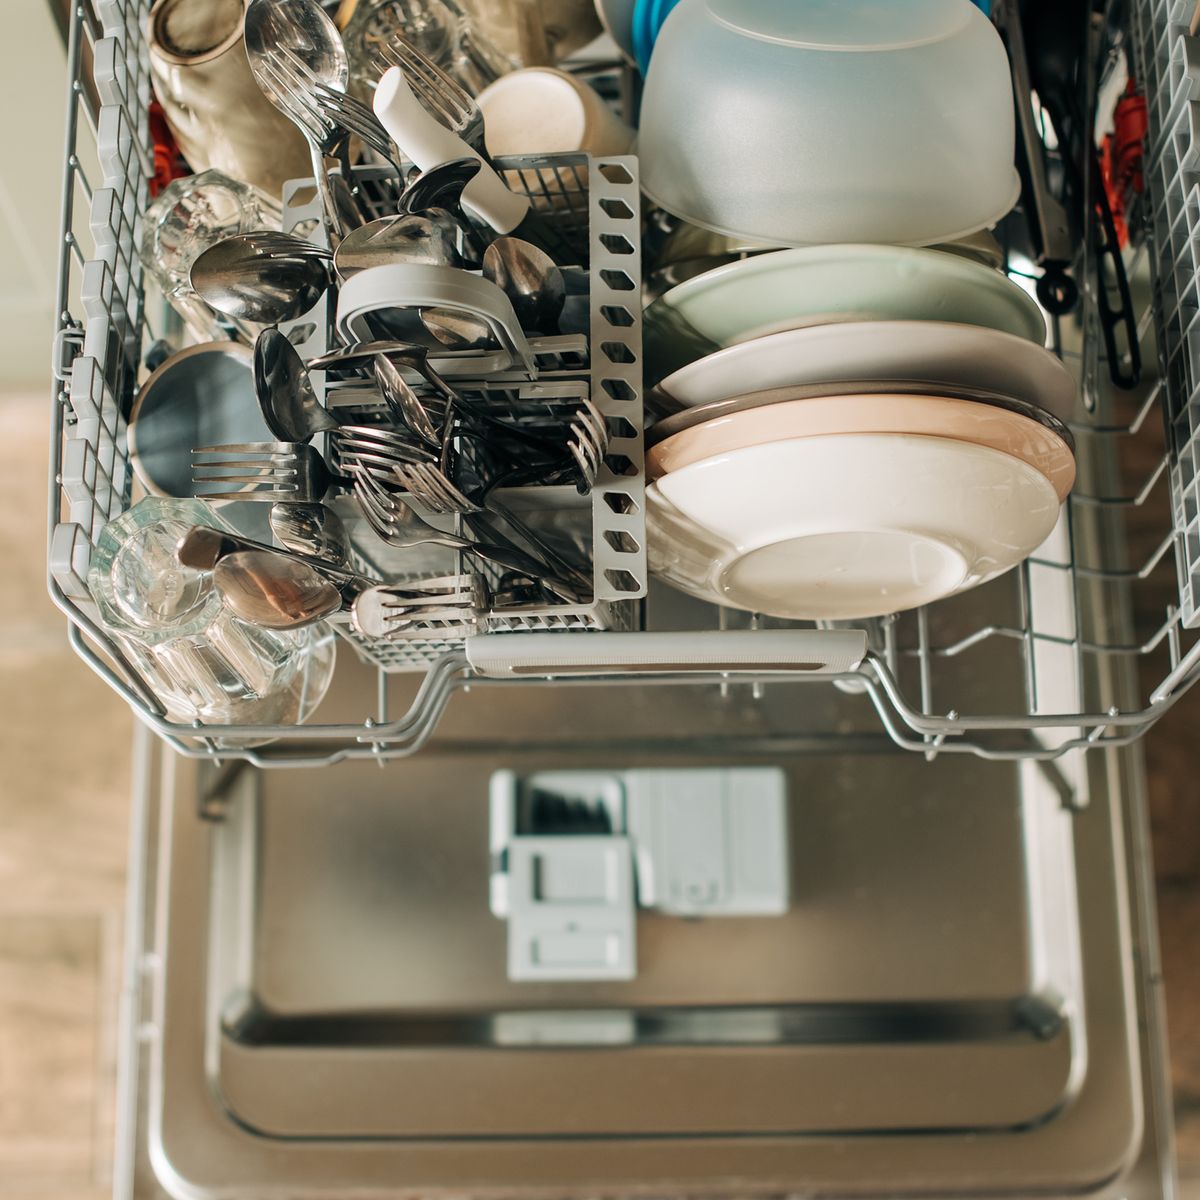 What to Use if You Accidentally Run Out of Dishwasher Detergent - razab